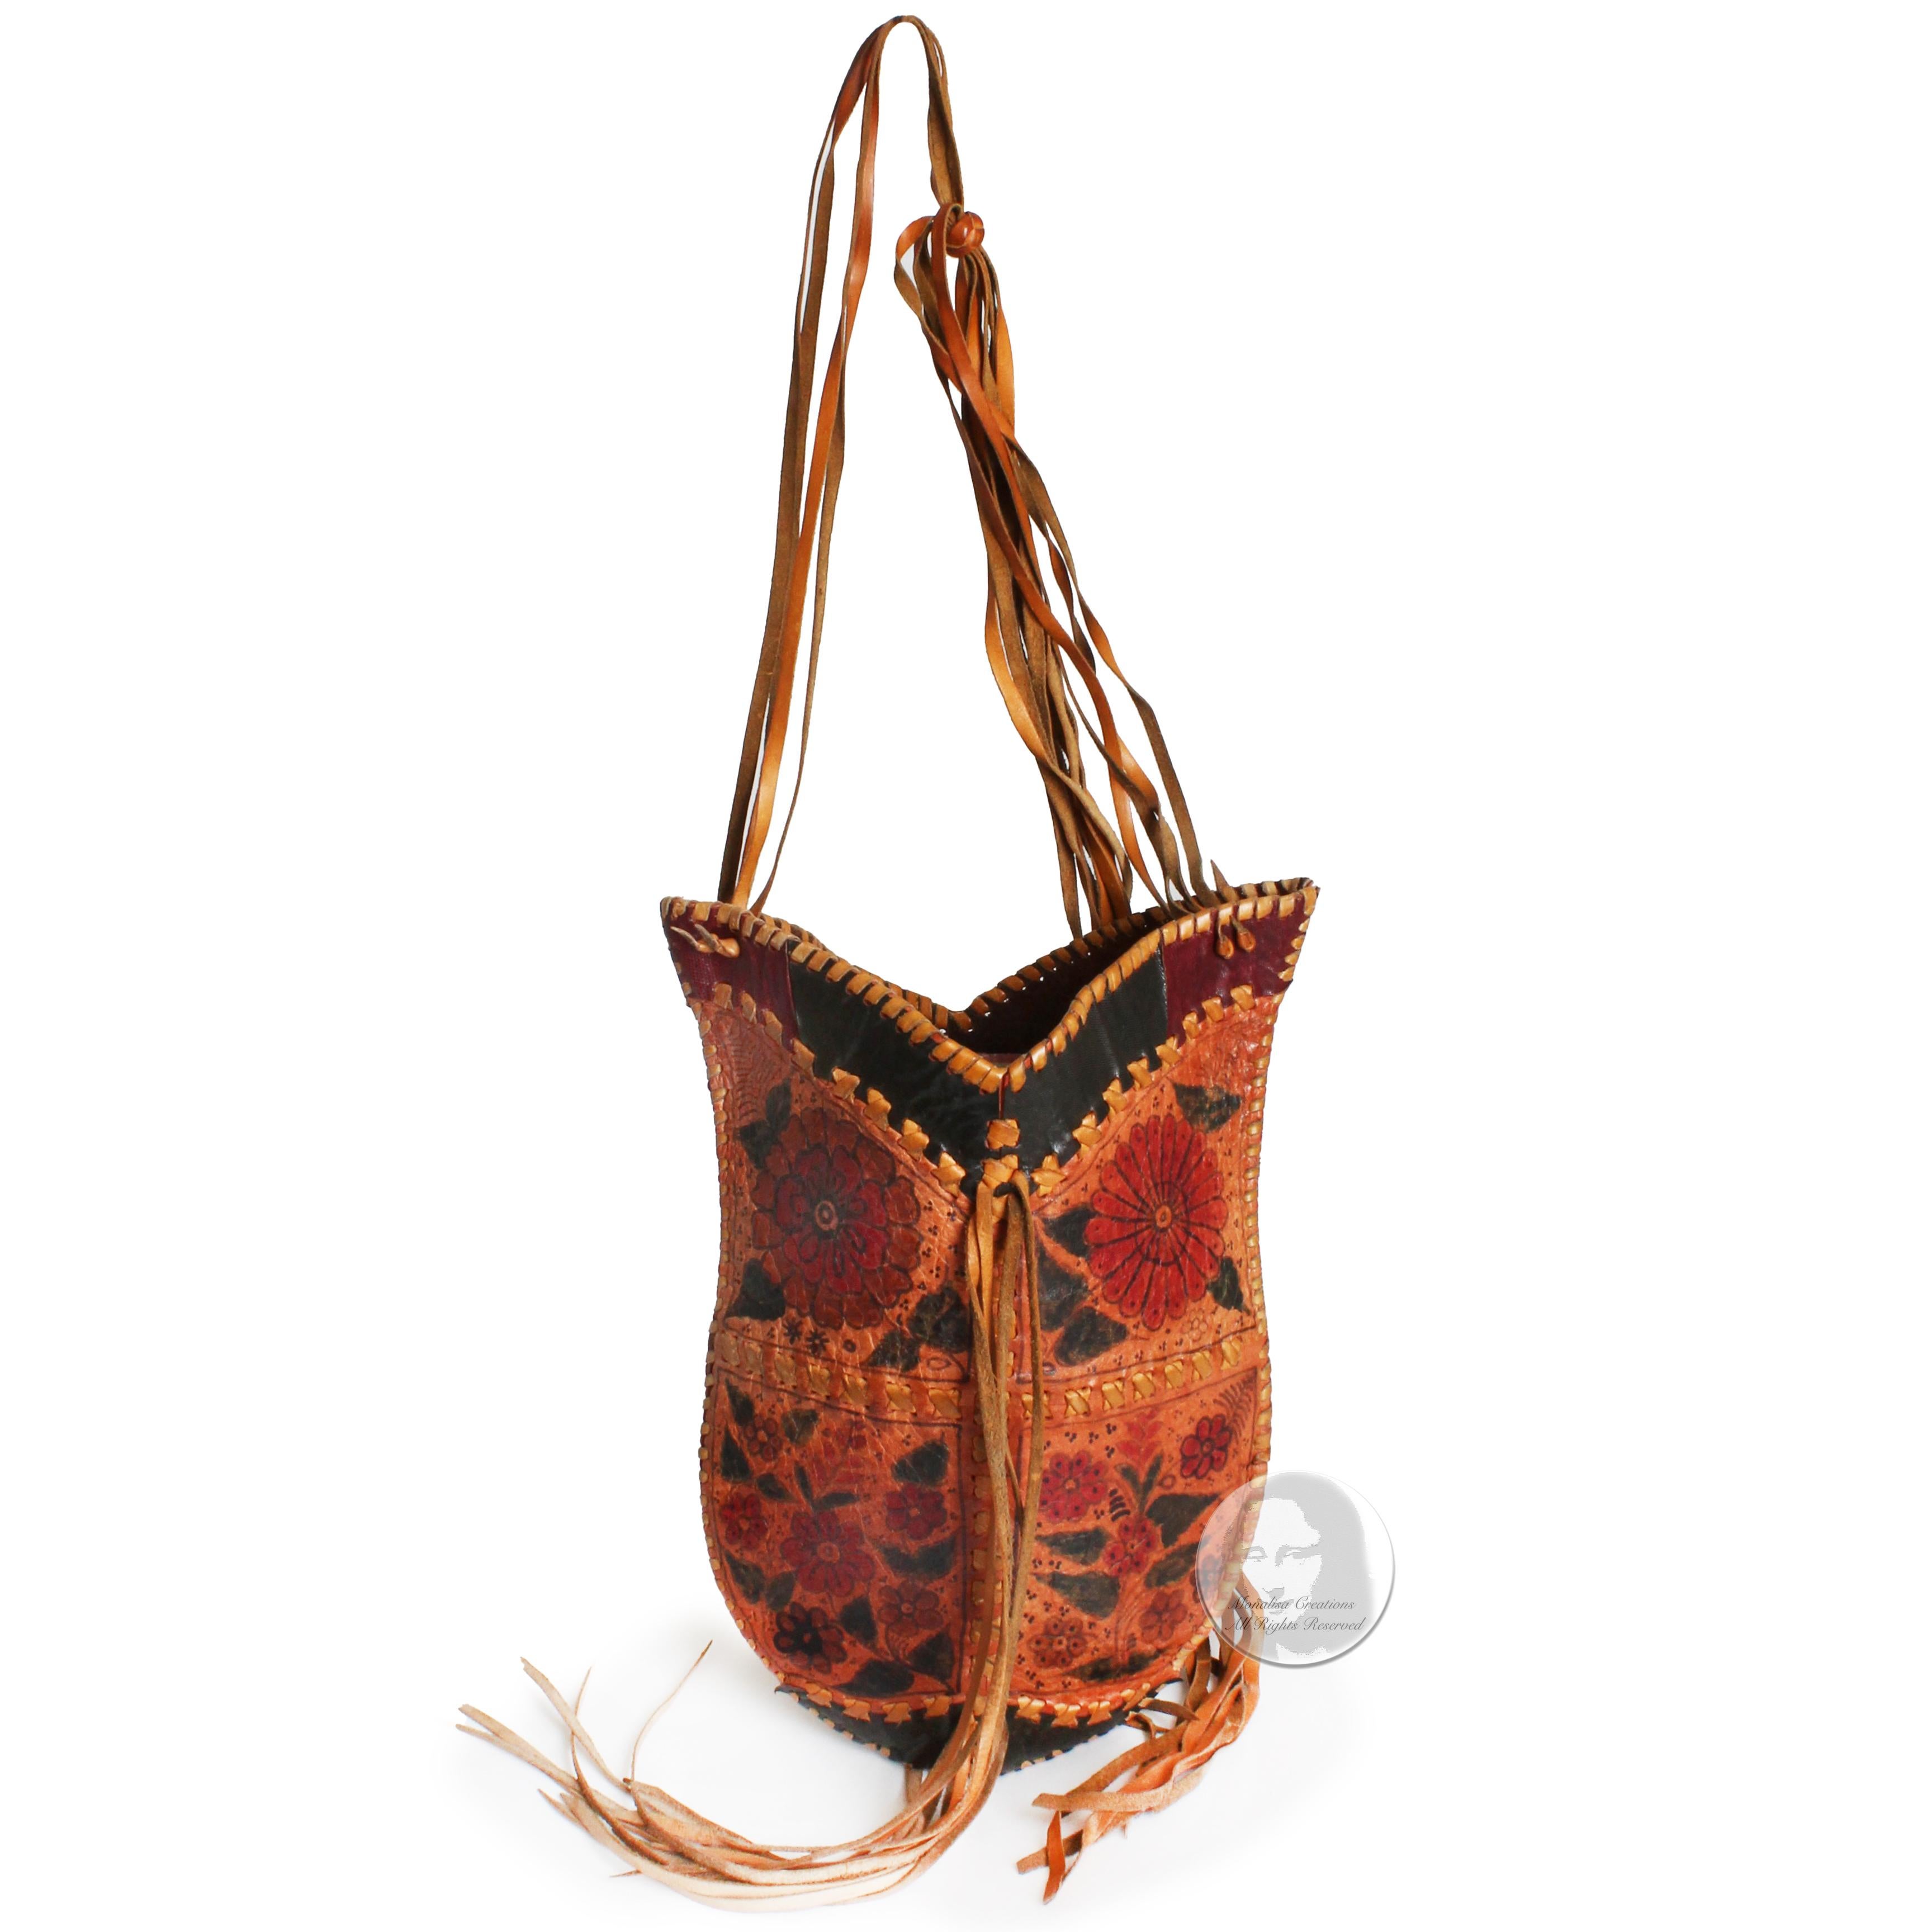 Fabulous, unique vintage Char Leather whipstitch shoulder bag with reptile skin inserts, long fringe & hand painted florals, likely made in the early 70s.  Unlined without closure.  Very rare style and color way, and so hard to find nowadays,